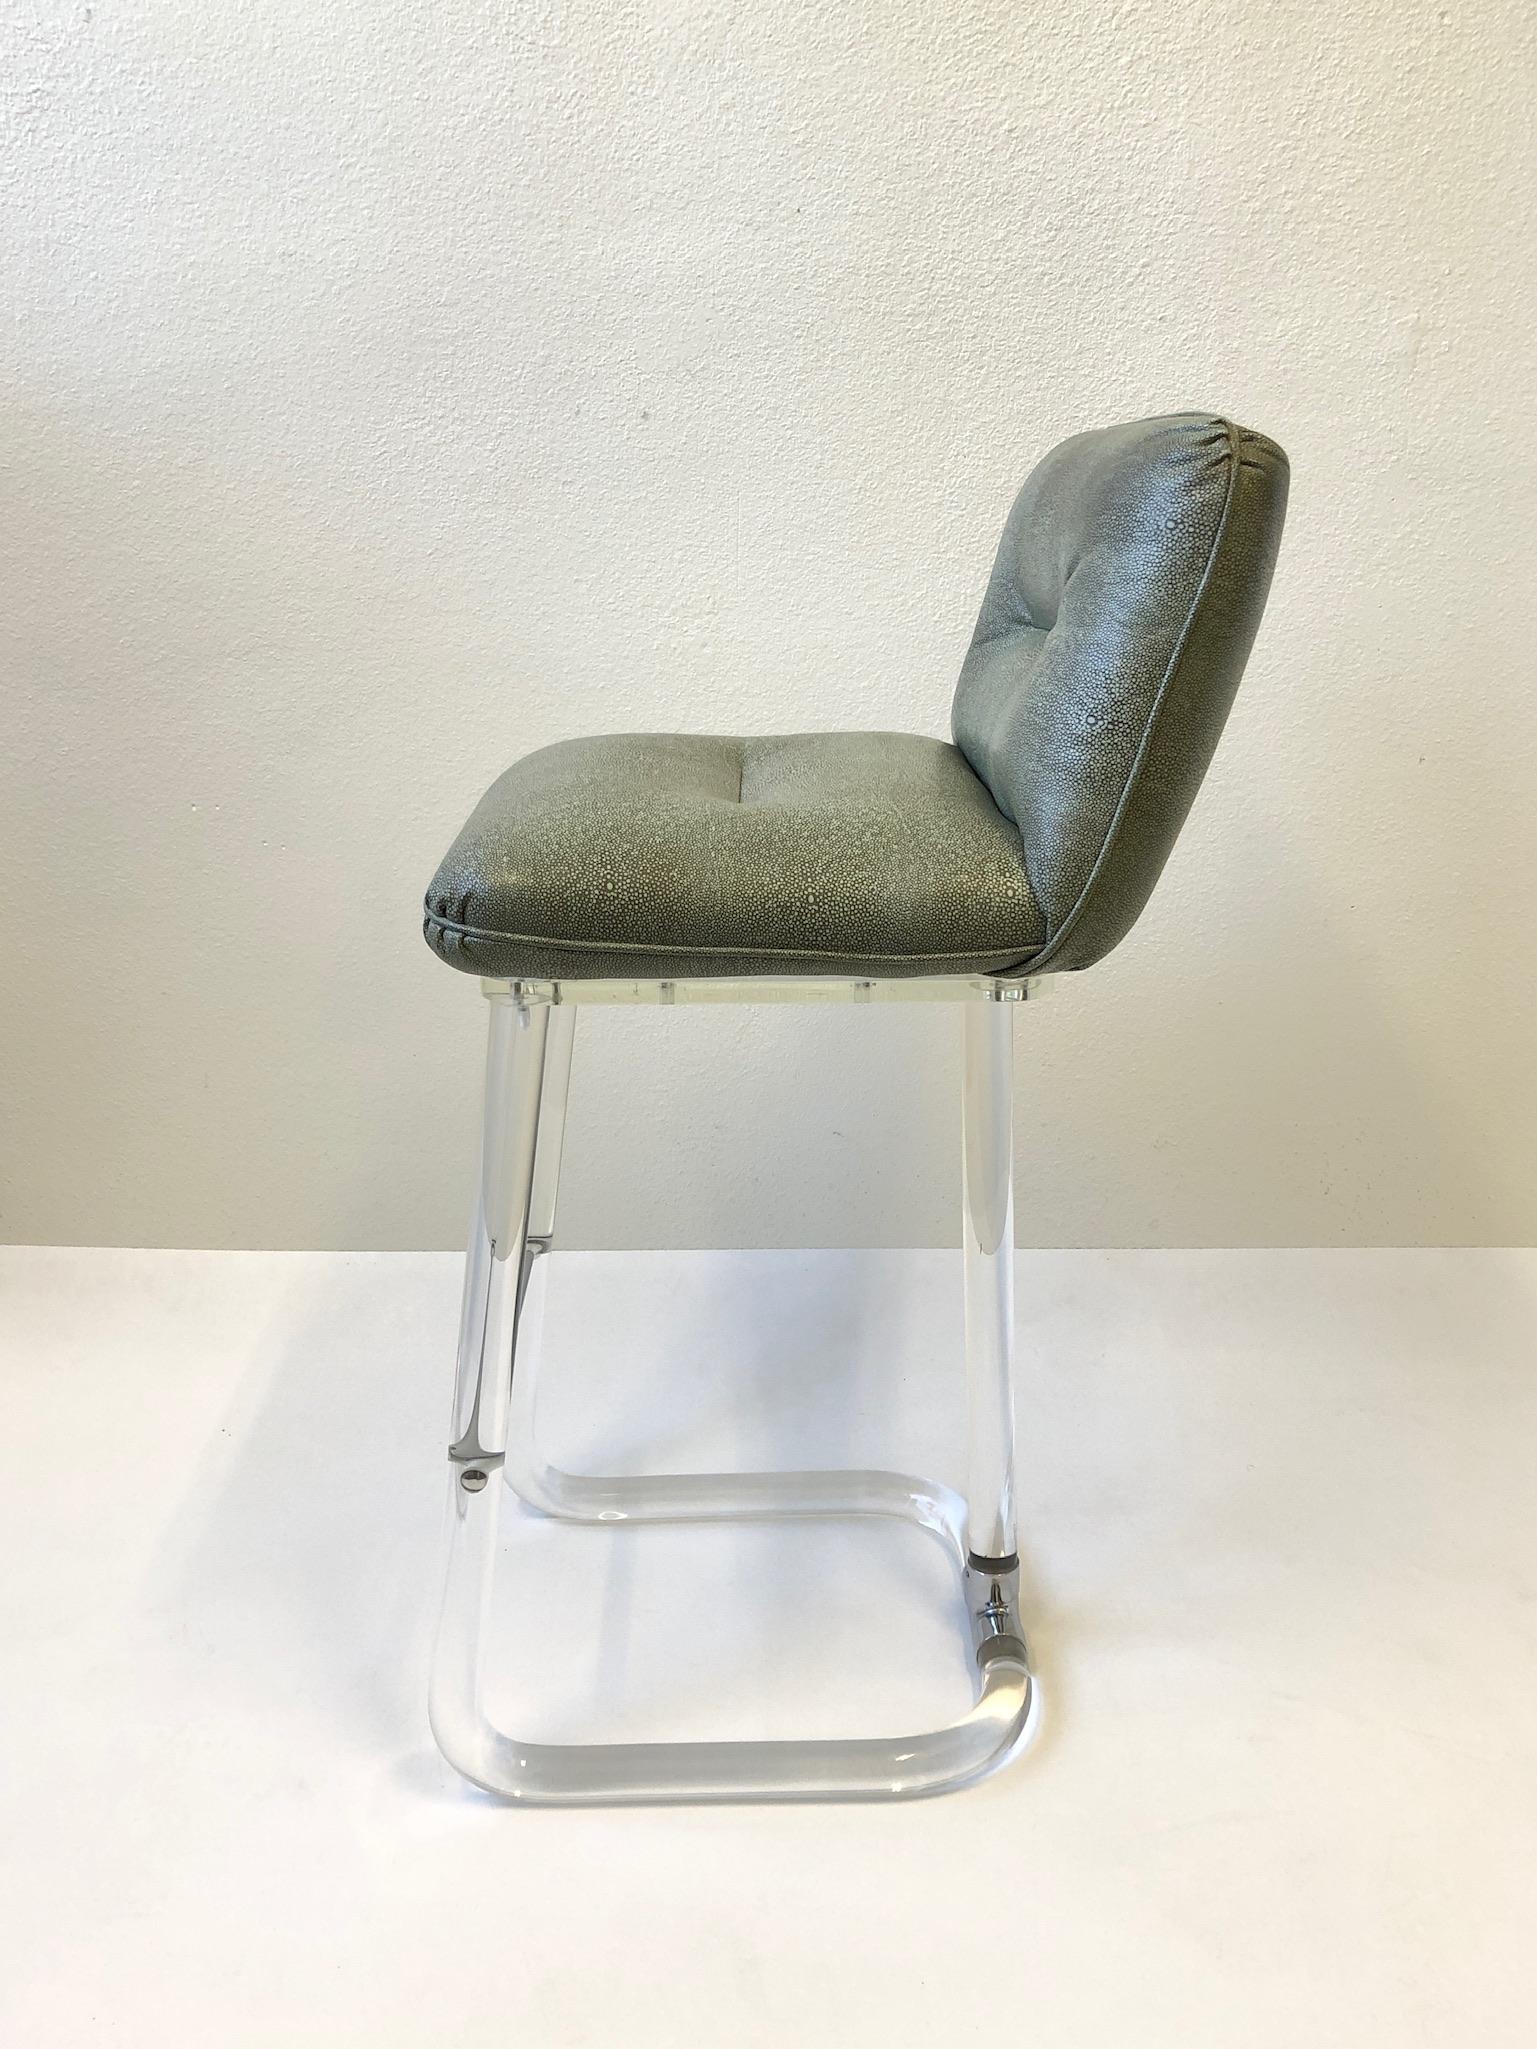 A beautiful clear Lucite and polish chrome with embossed shagreen leather seat barstool. Design by Lion in Frost in the 1980s. The stool is sign( see detail photos).
Measurements: 39.5” high 19” wide 22.5” deep 30.5” seat.